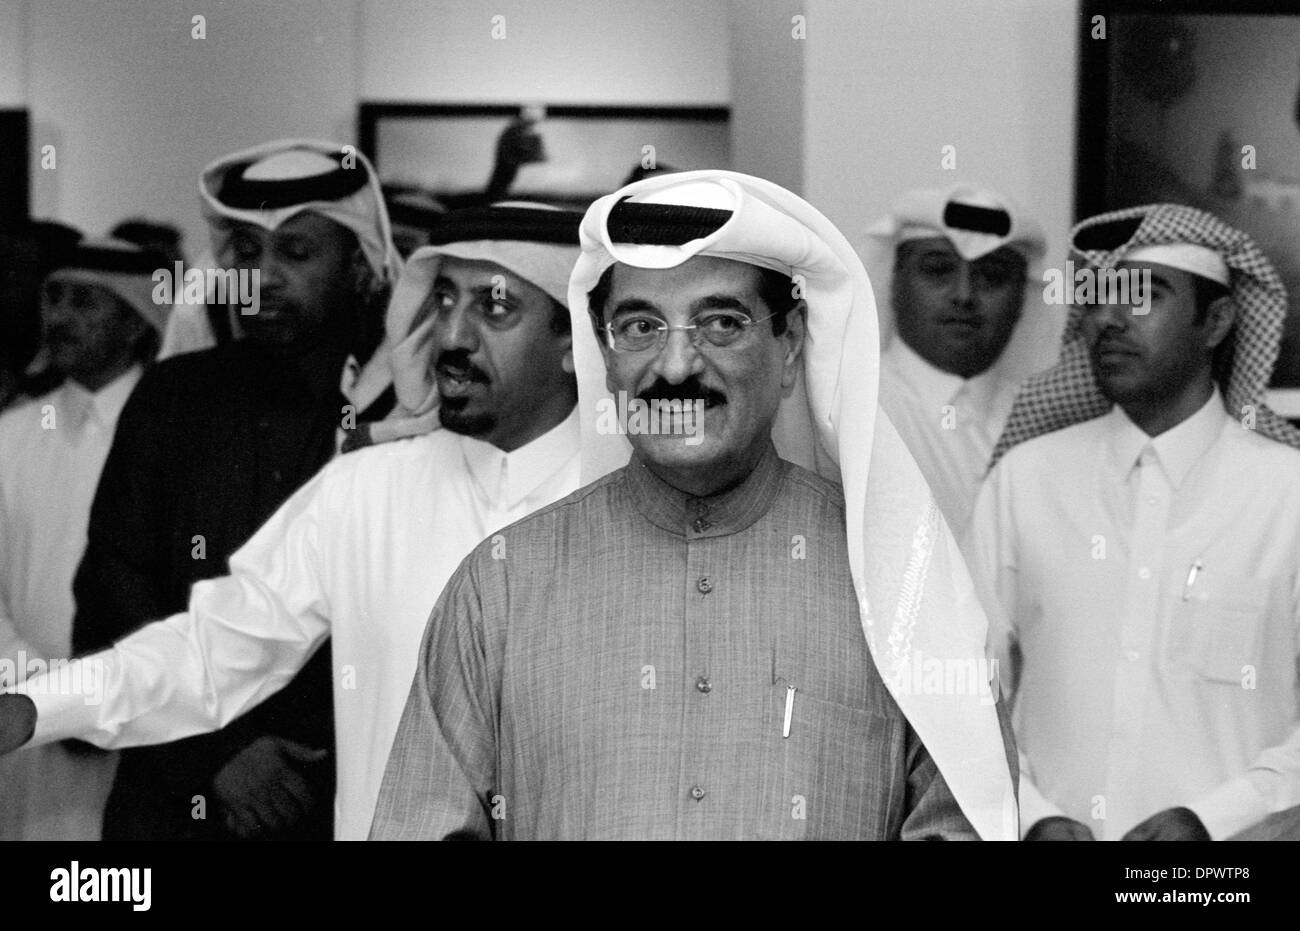 Doha, Qatar - Jan 15, 2014: Qatari Minister of Arts Culture and Heritage, HE Dr Hamad bin Abdulaziz al-Kuwari (centre),talks to club officials at the ‘Simply Beautiful’ National Geographic Photo Exhibition, hosted by Qatar Photographic Society, at Katara cultural village in West Bay.  The minister's daughter, Iman, was co-owner of the Gympanzee nursery in Villagio Mall, Doha, where a tragic fire killed 19 people, including 13 children, in May 2012 Stock Photo